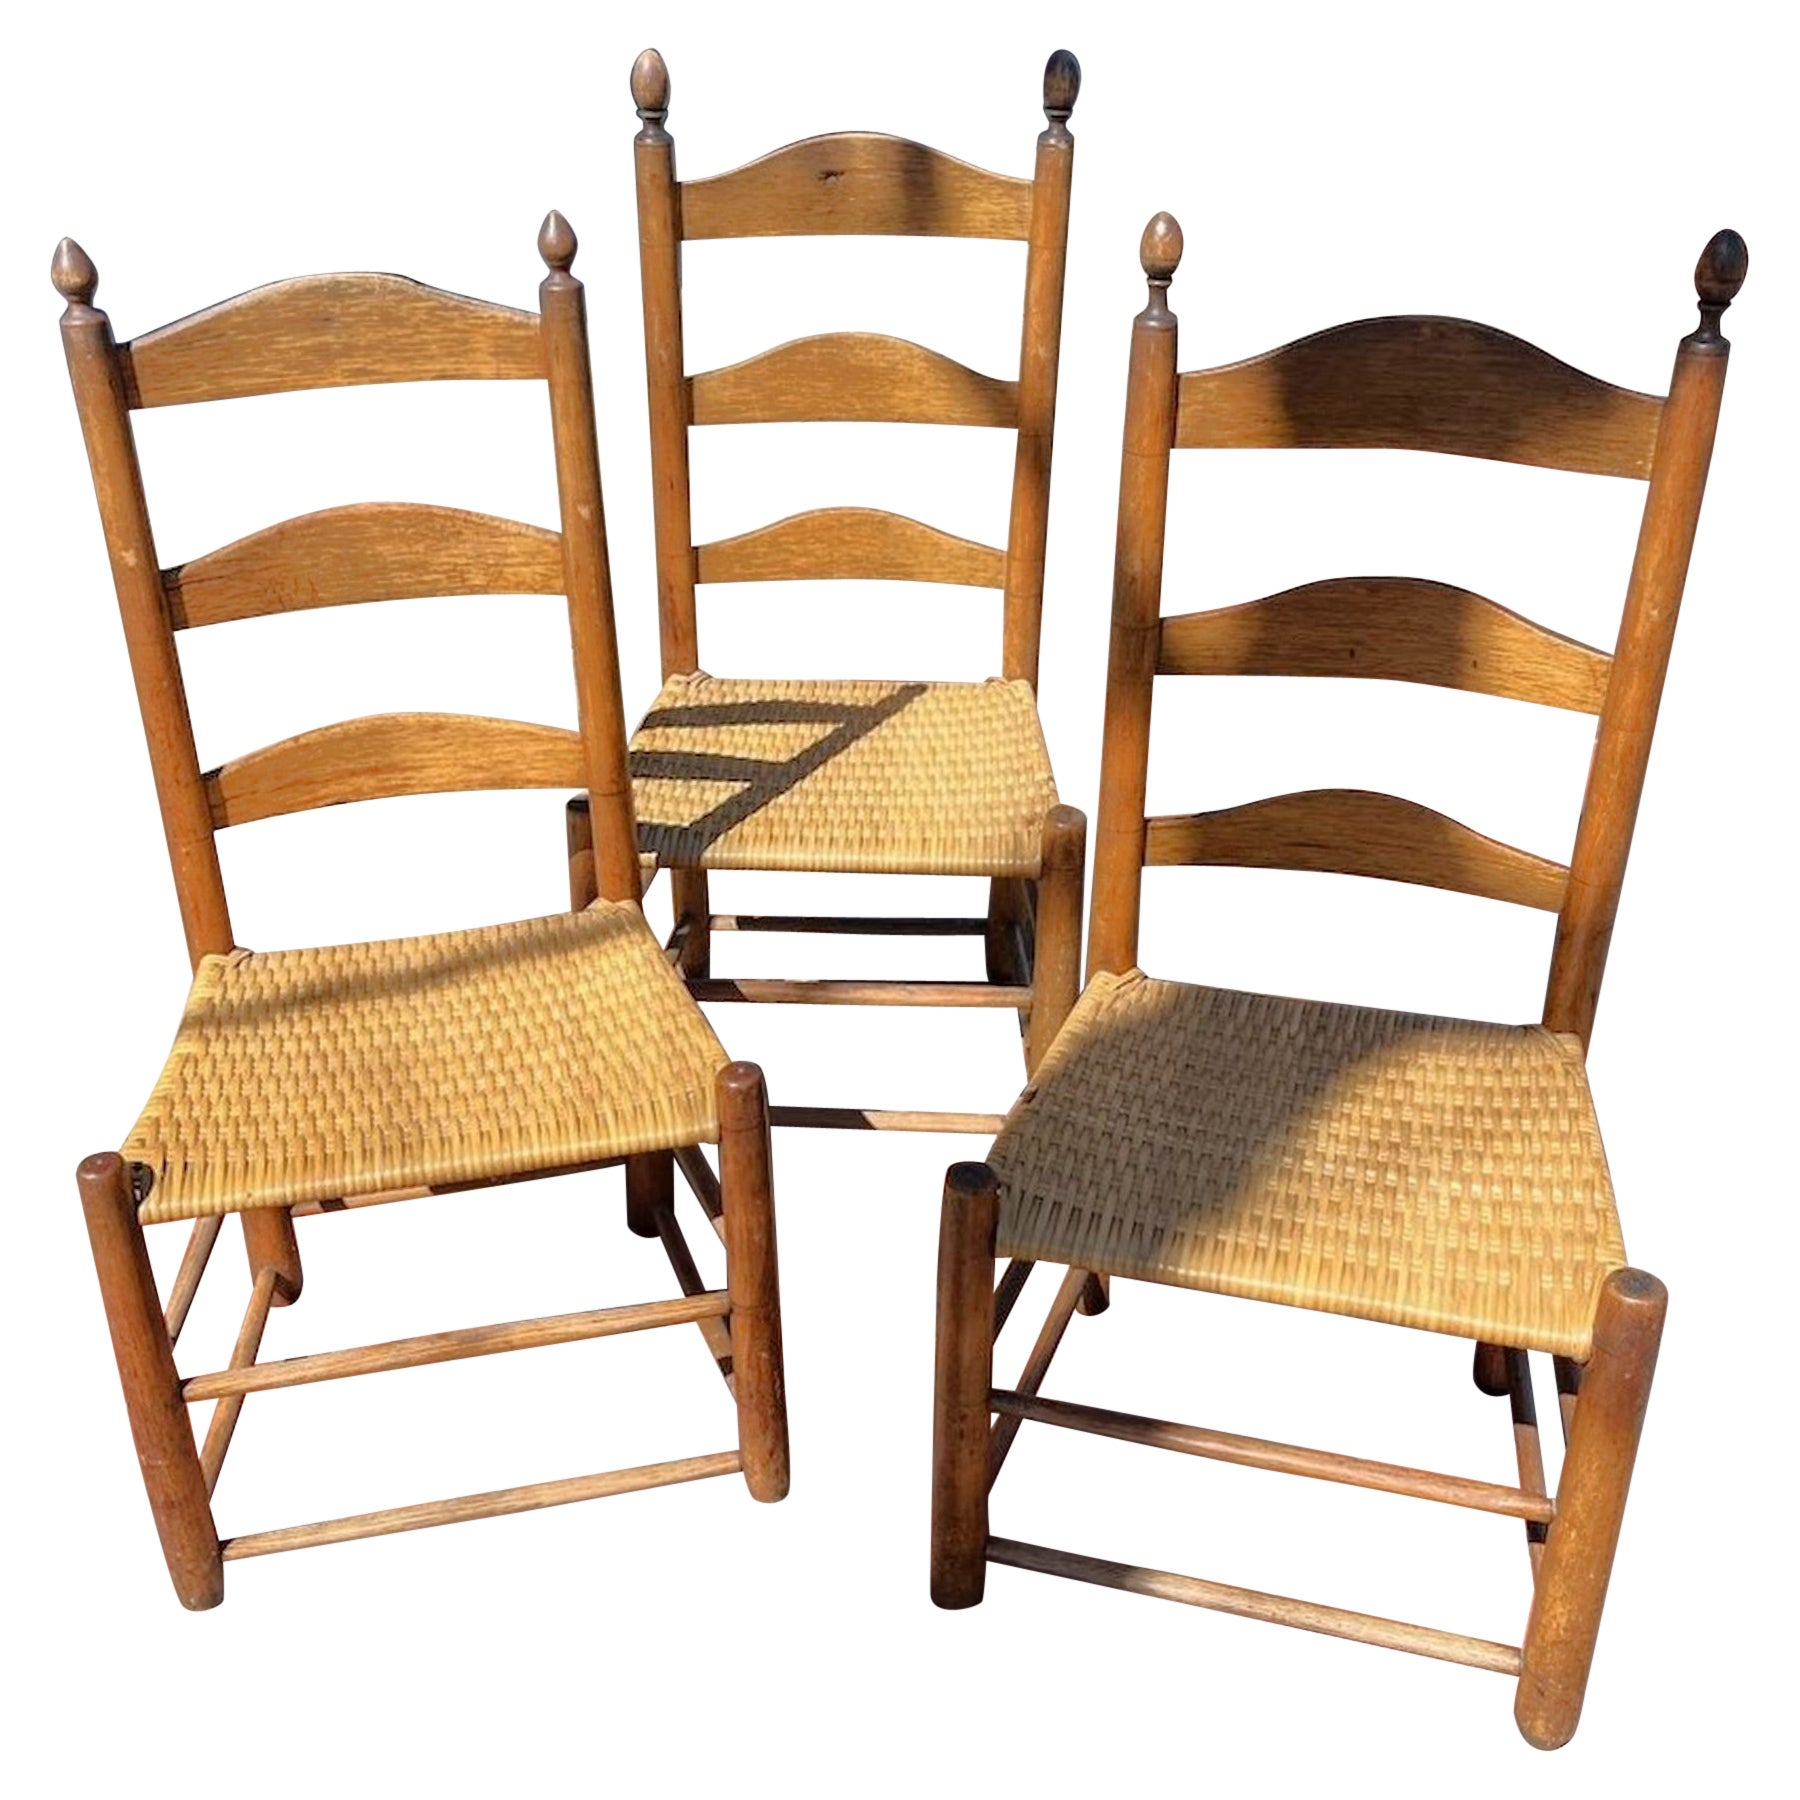 19thc Ladder Back Chairs From Pennsylvania -Set of Three